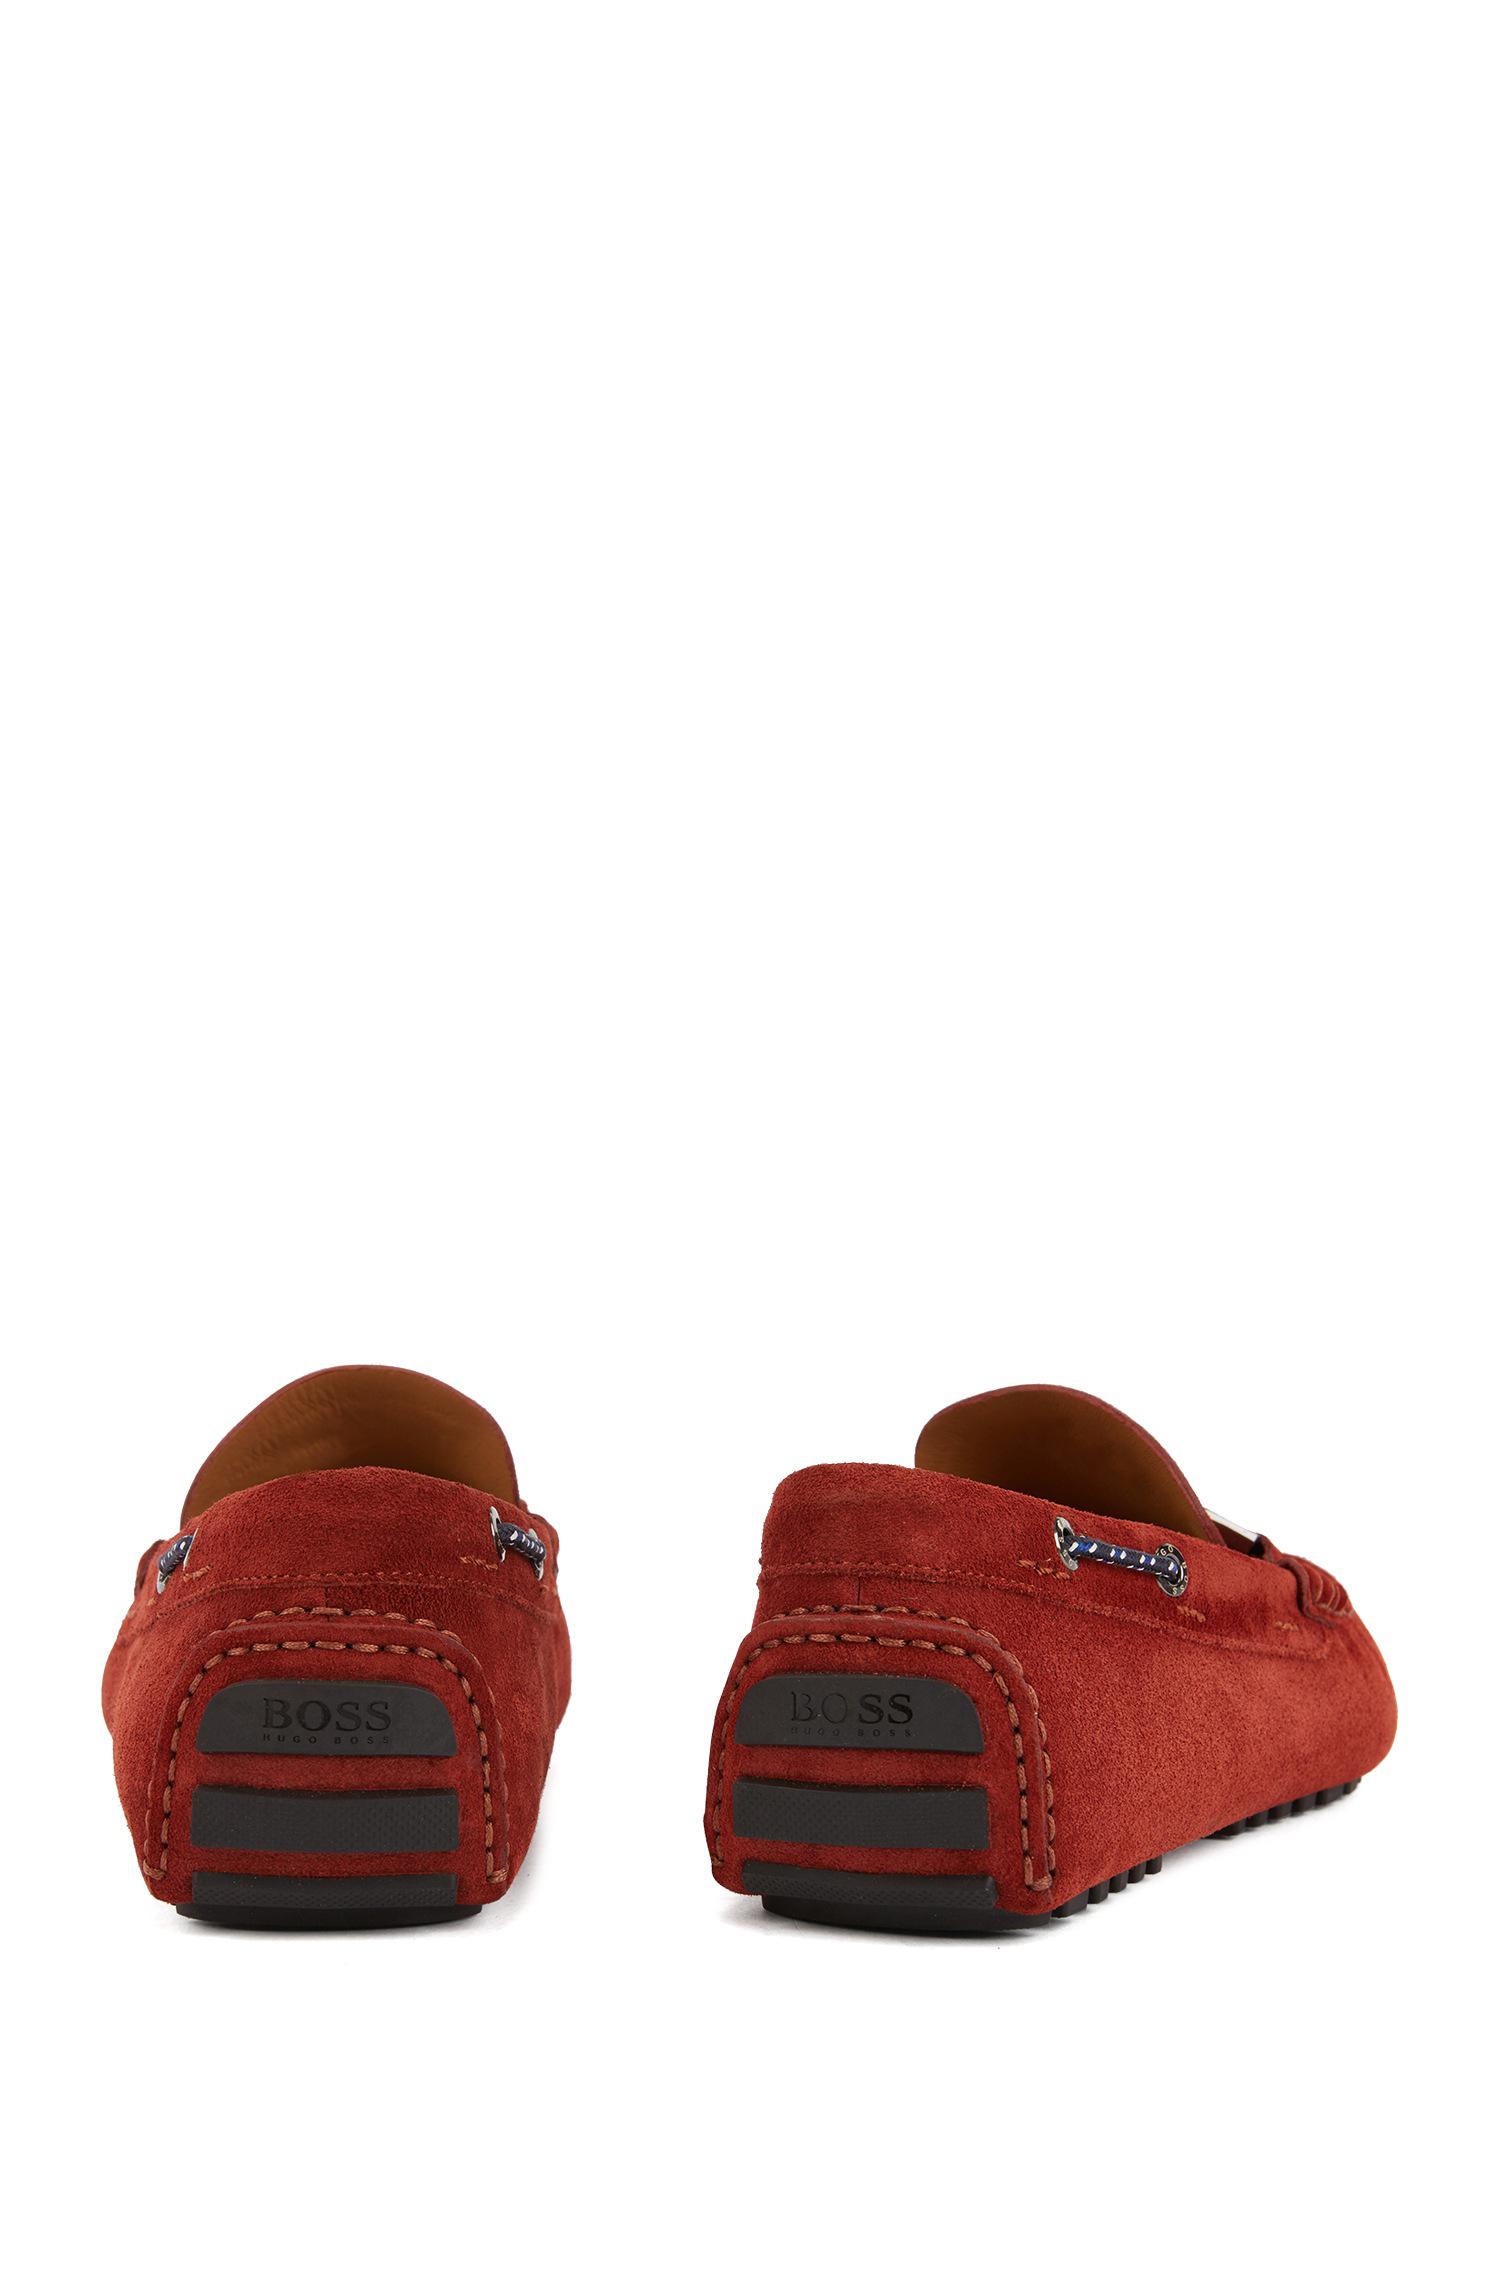 BOSS by Hugo Boss Italian-made Suede Moccasins With Woven Cord in Dark Red ( Red) for Men - Lyst